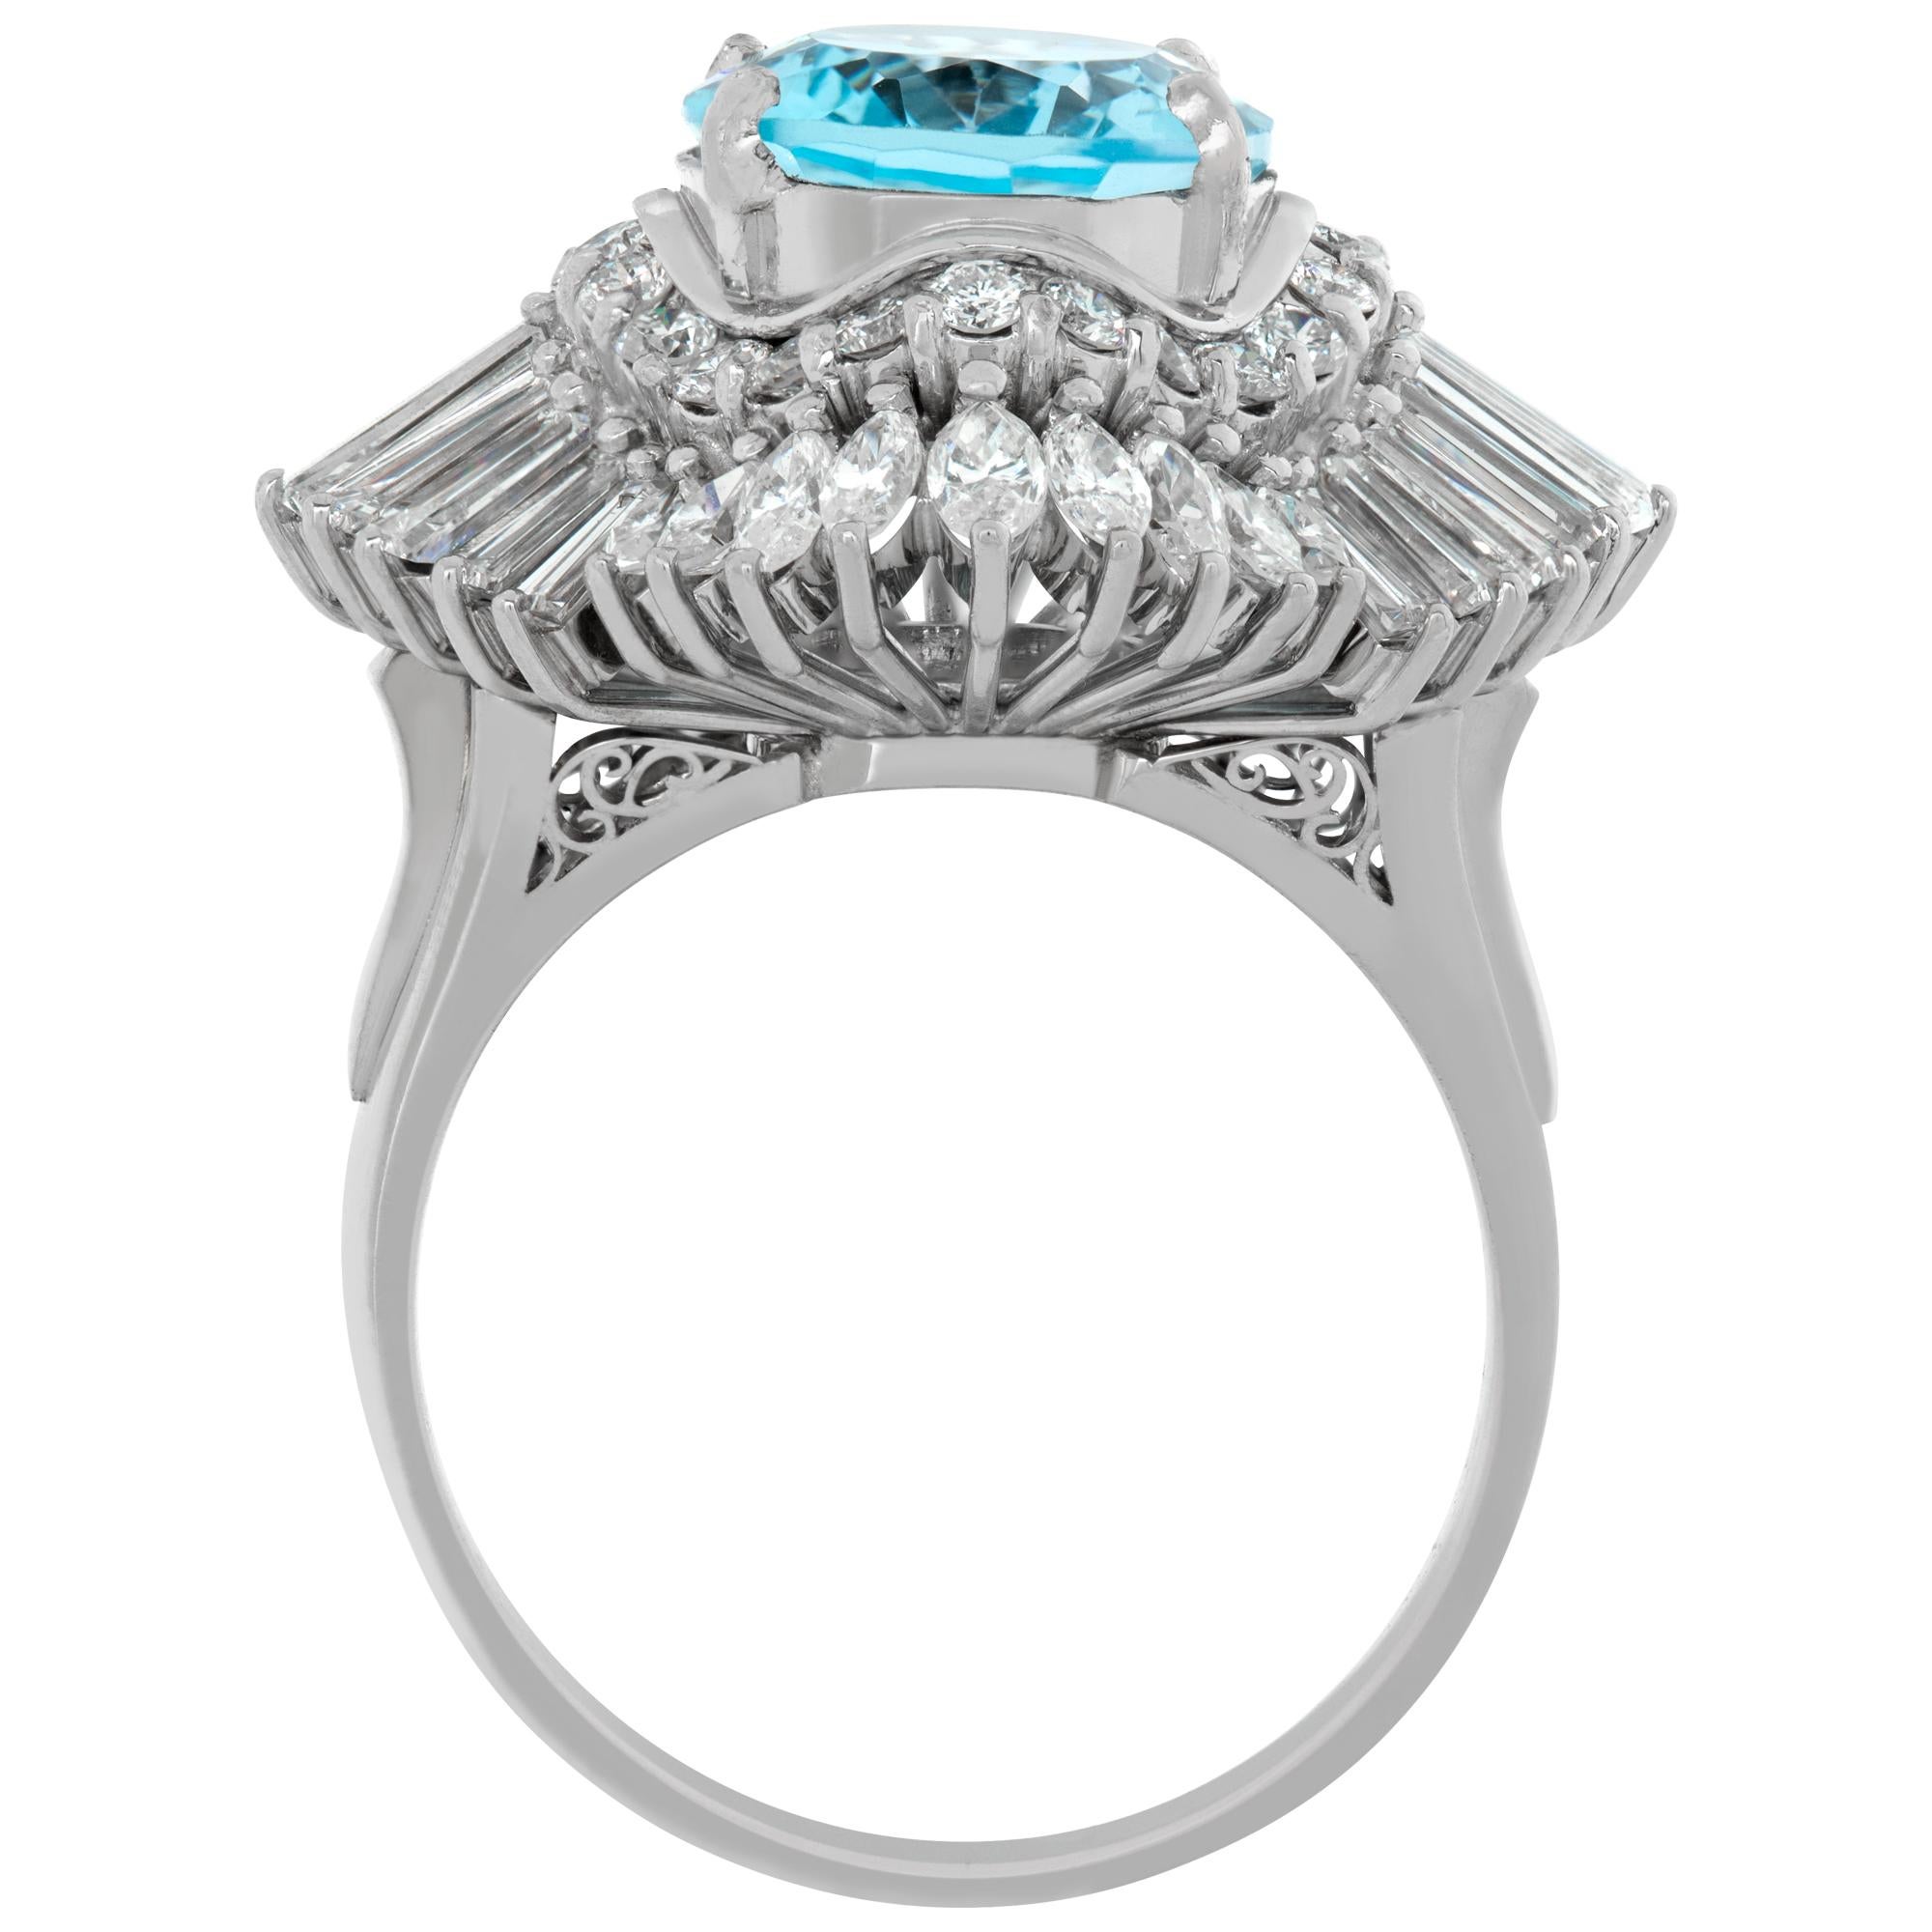 Women's Oval Blue Topaz ring 2.5 cts baguette round & marquis diamonds platinum setting